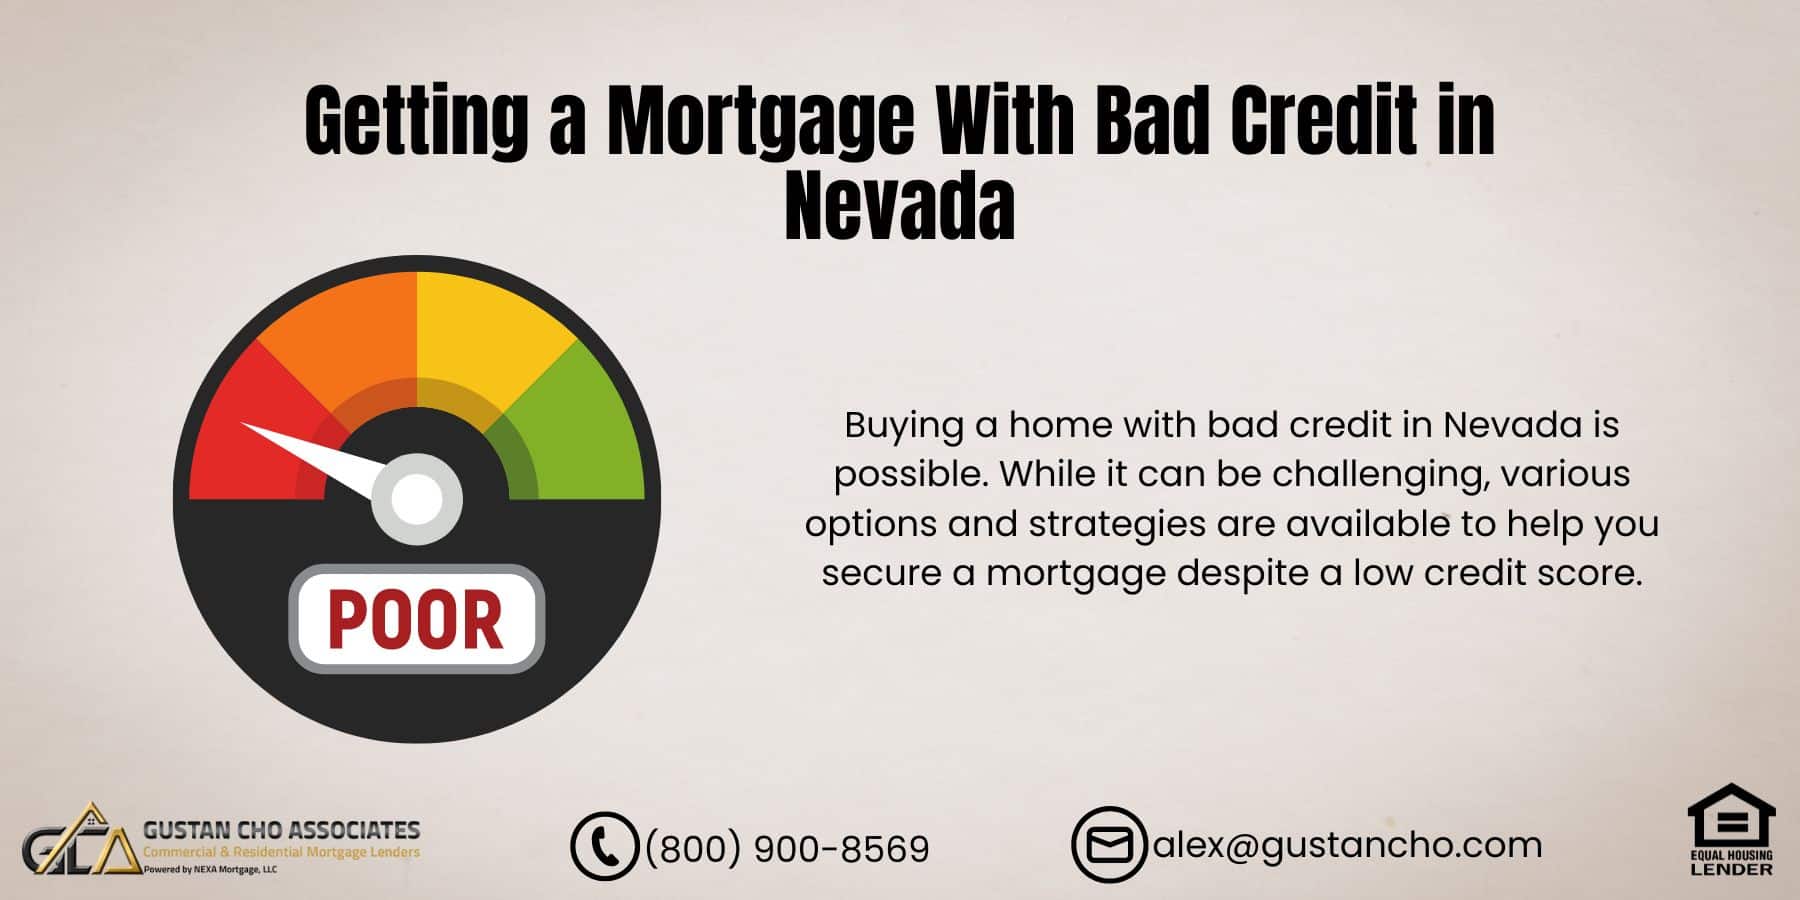 Getting a Mortgage With Bad Credit in Nevada